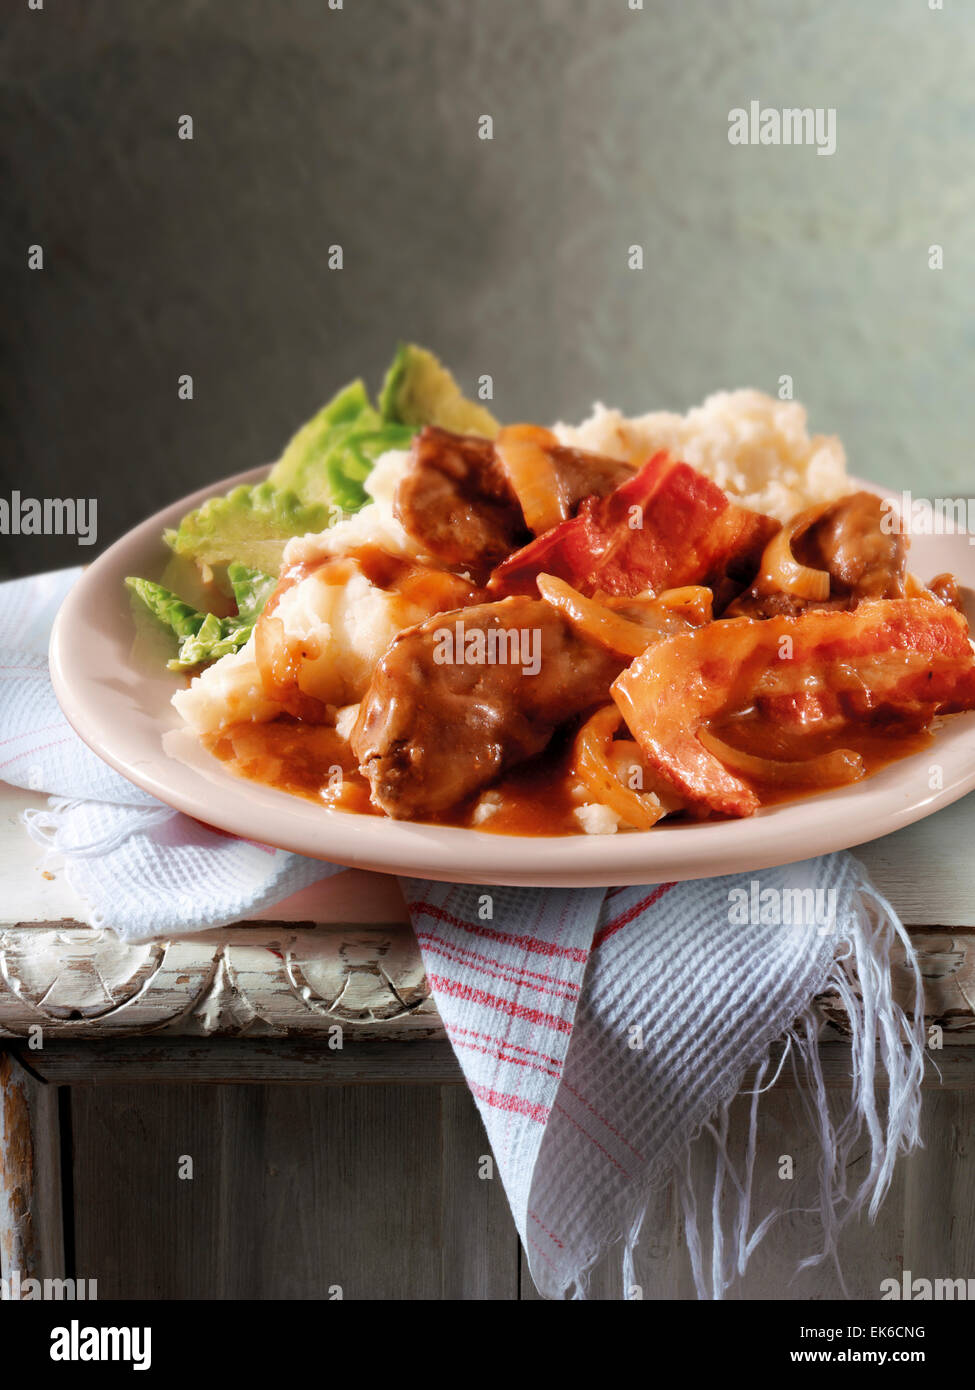 Traditional British cooked recipe of liver & bacon casserole with mashed potato served on a plate in a rustic table setting Stock Photo